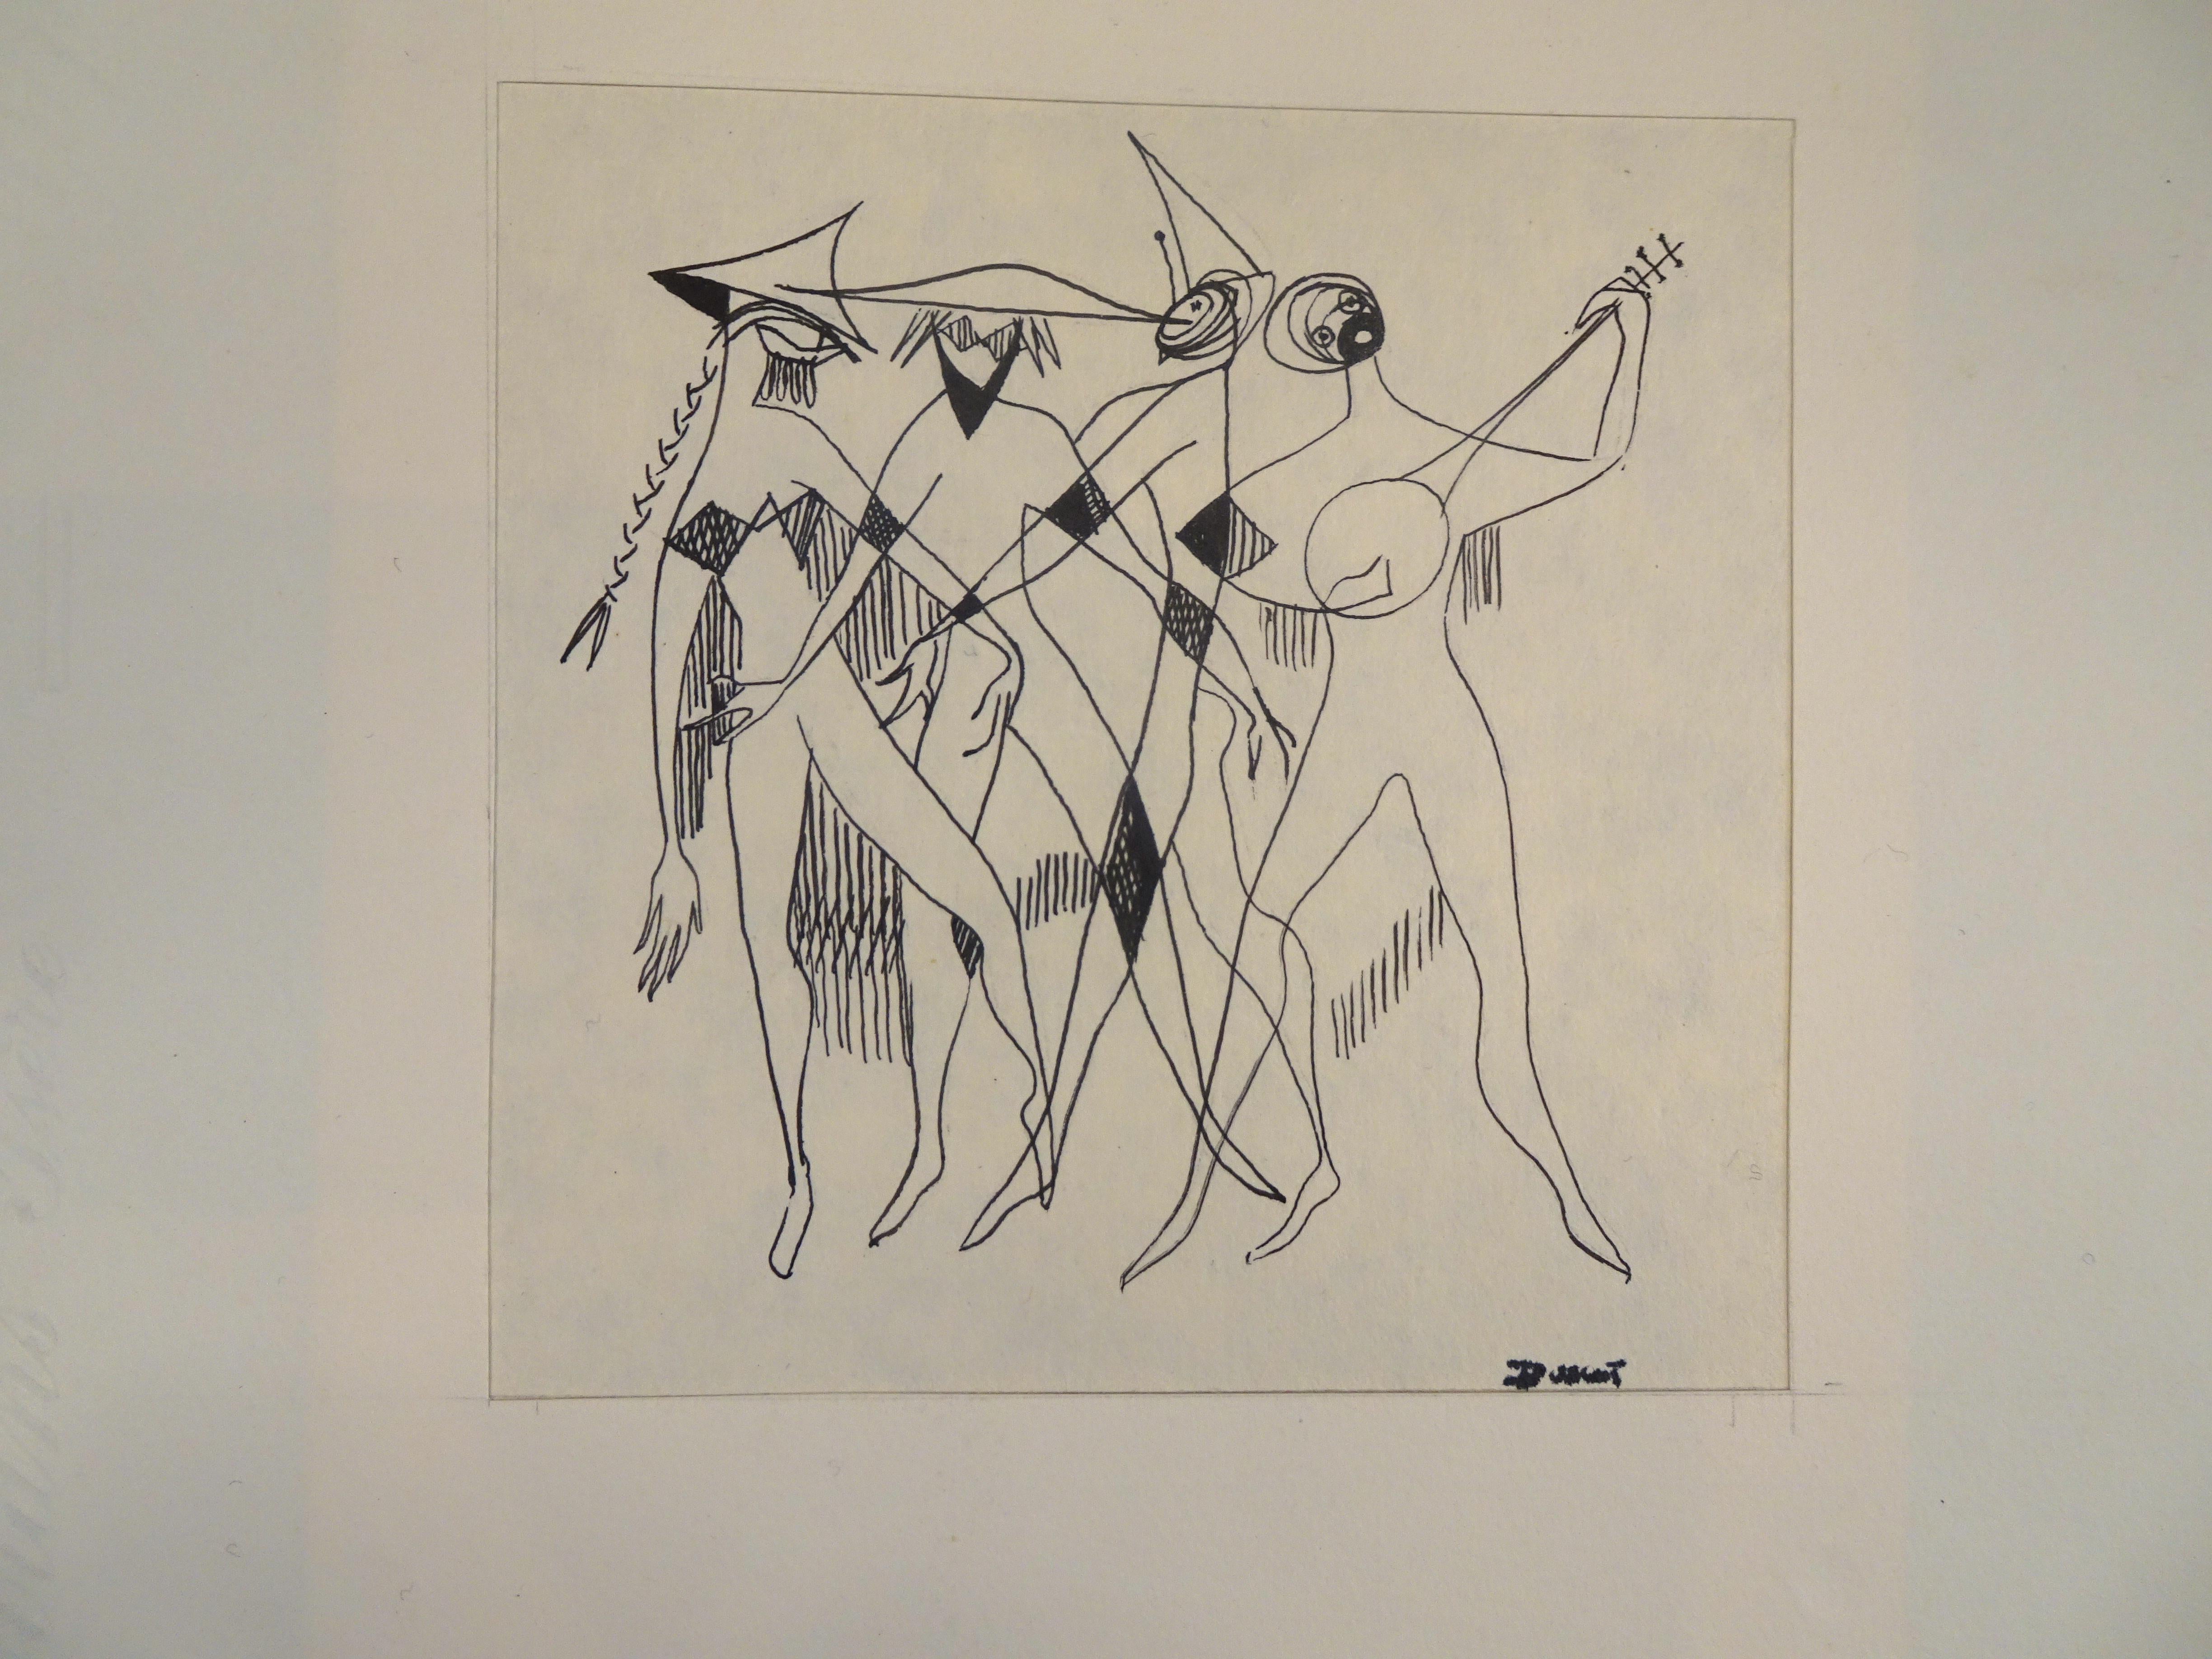 The Party - Original Ink Drawing on Paper by Buscot 1